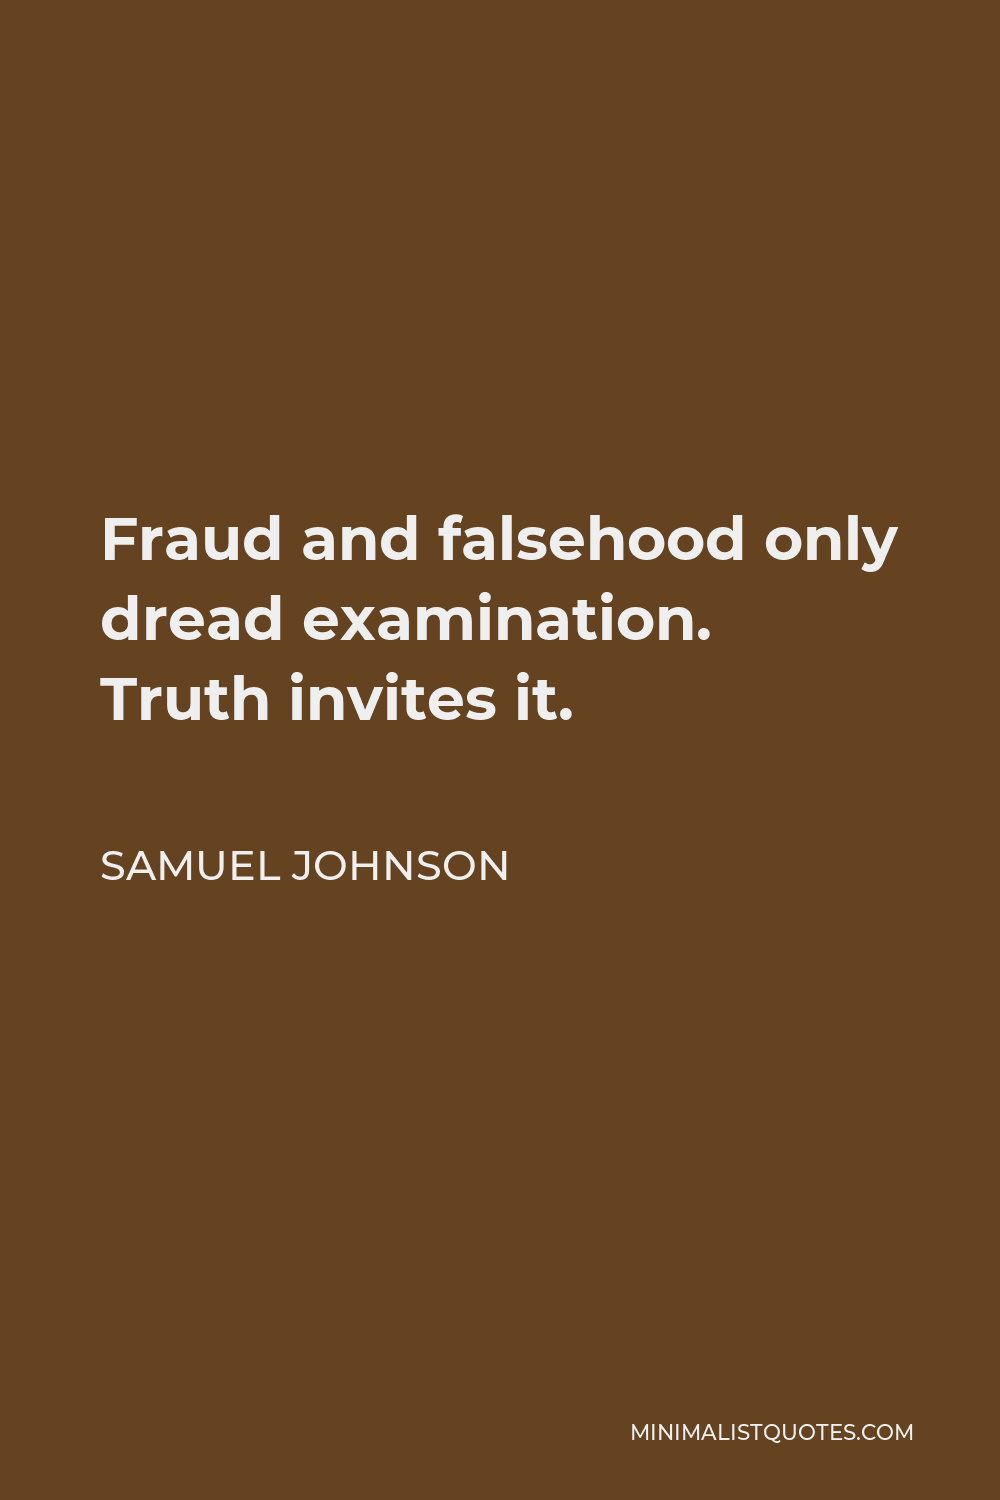 Samuel Johnson Quote - Fraud and falsehood only dread examination. Truth invites it.